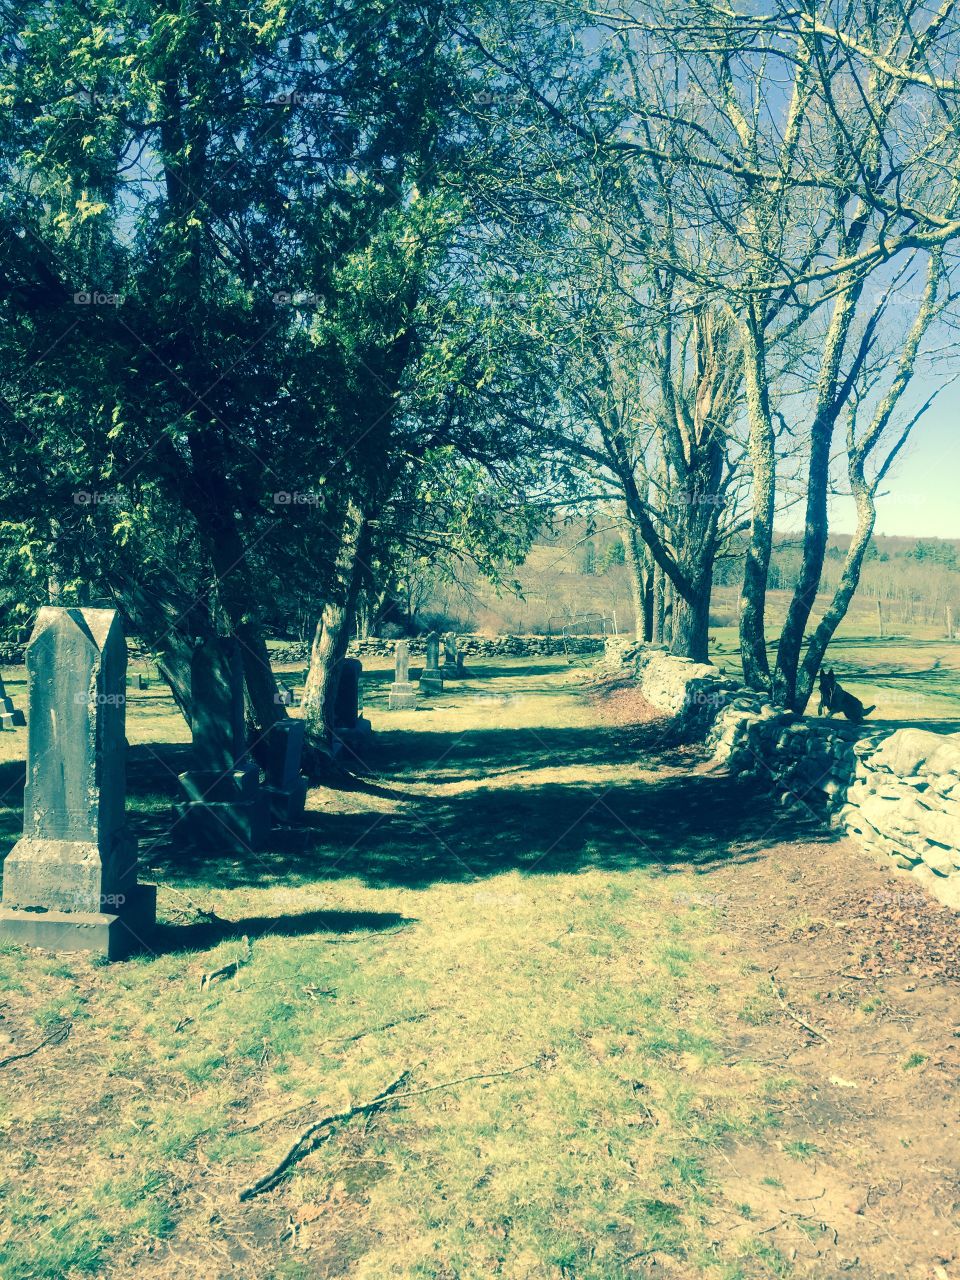 Old 1700's cemetery with wall and old road
New York 